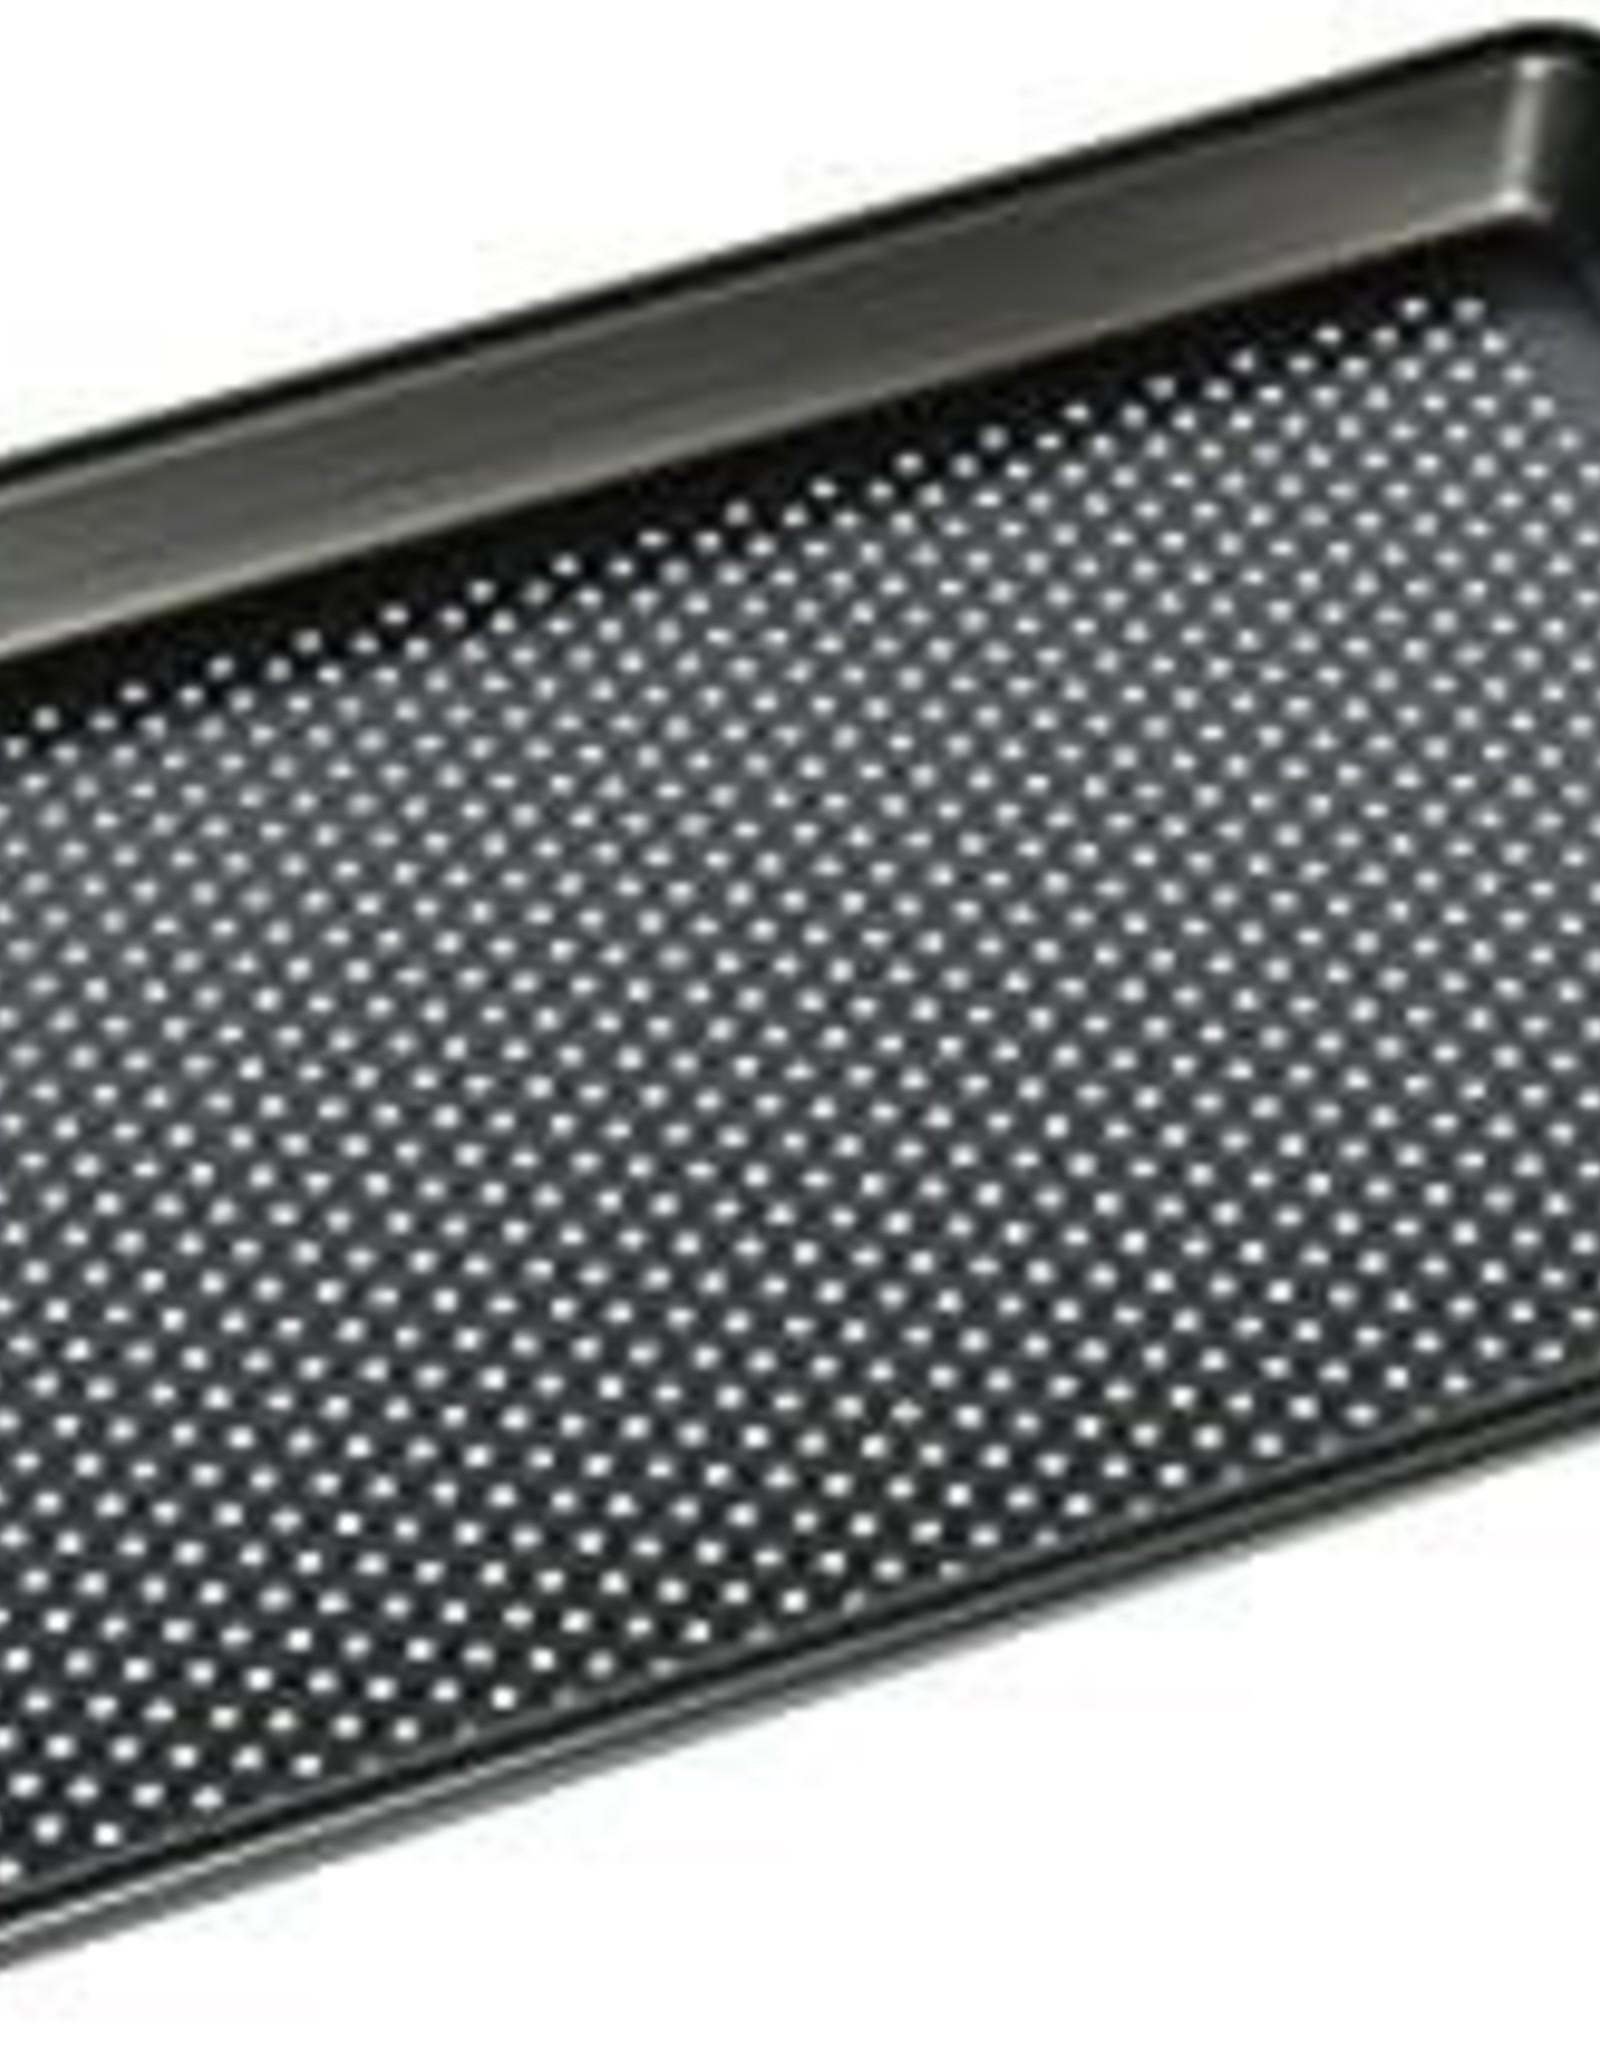 Perforated Jelly Roll Pan (10"x15")